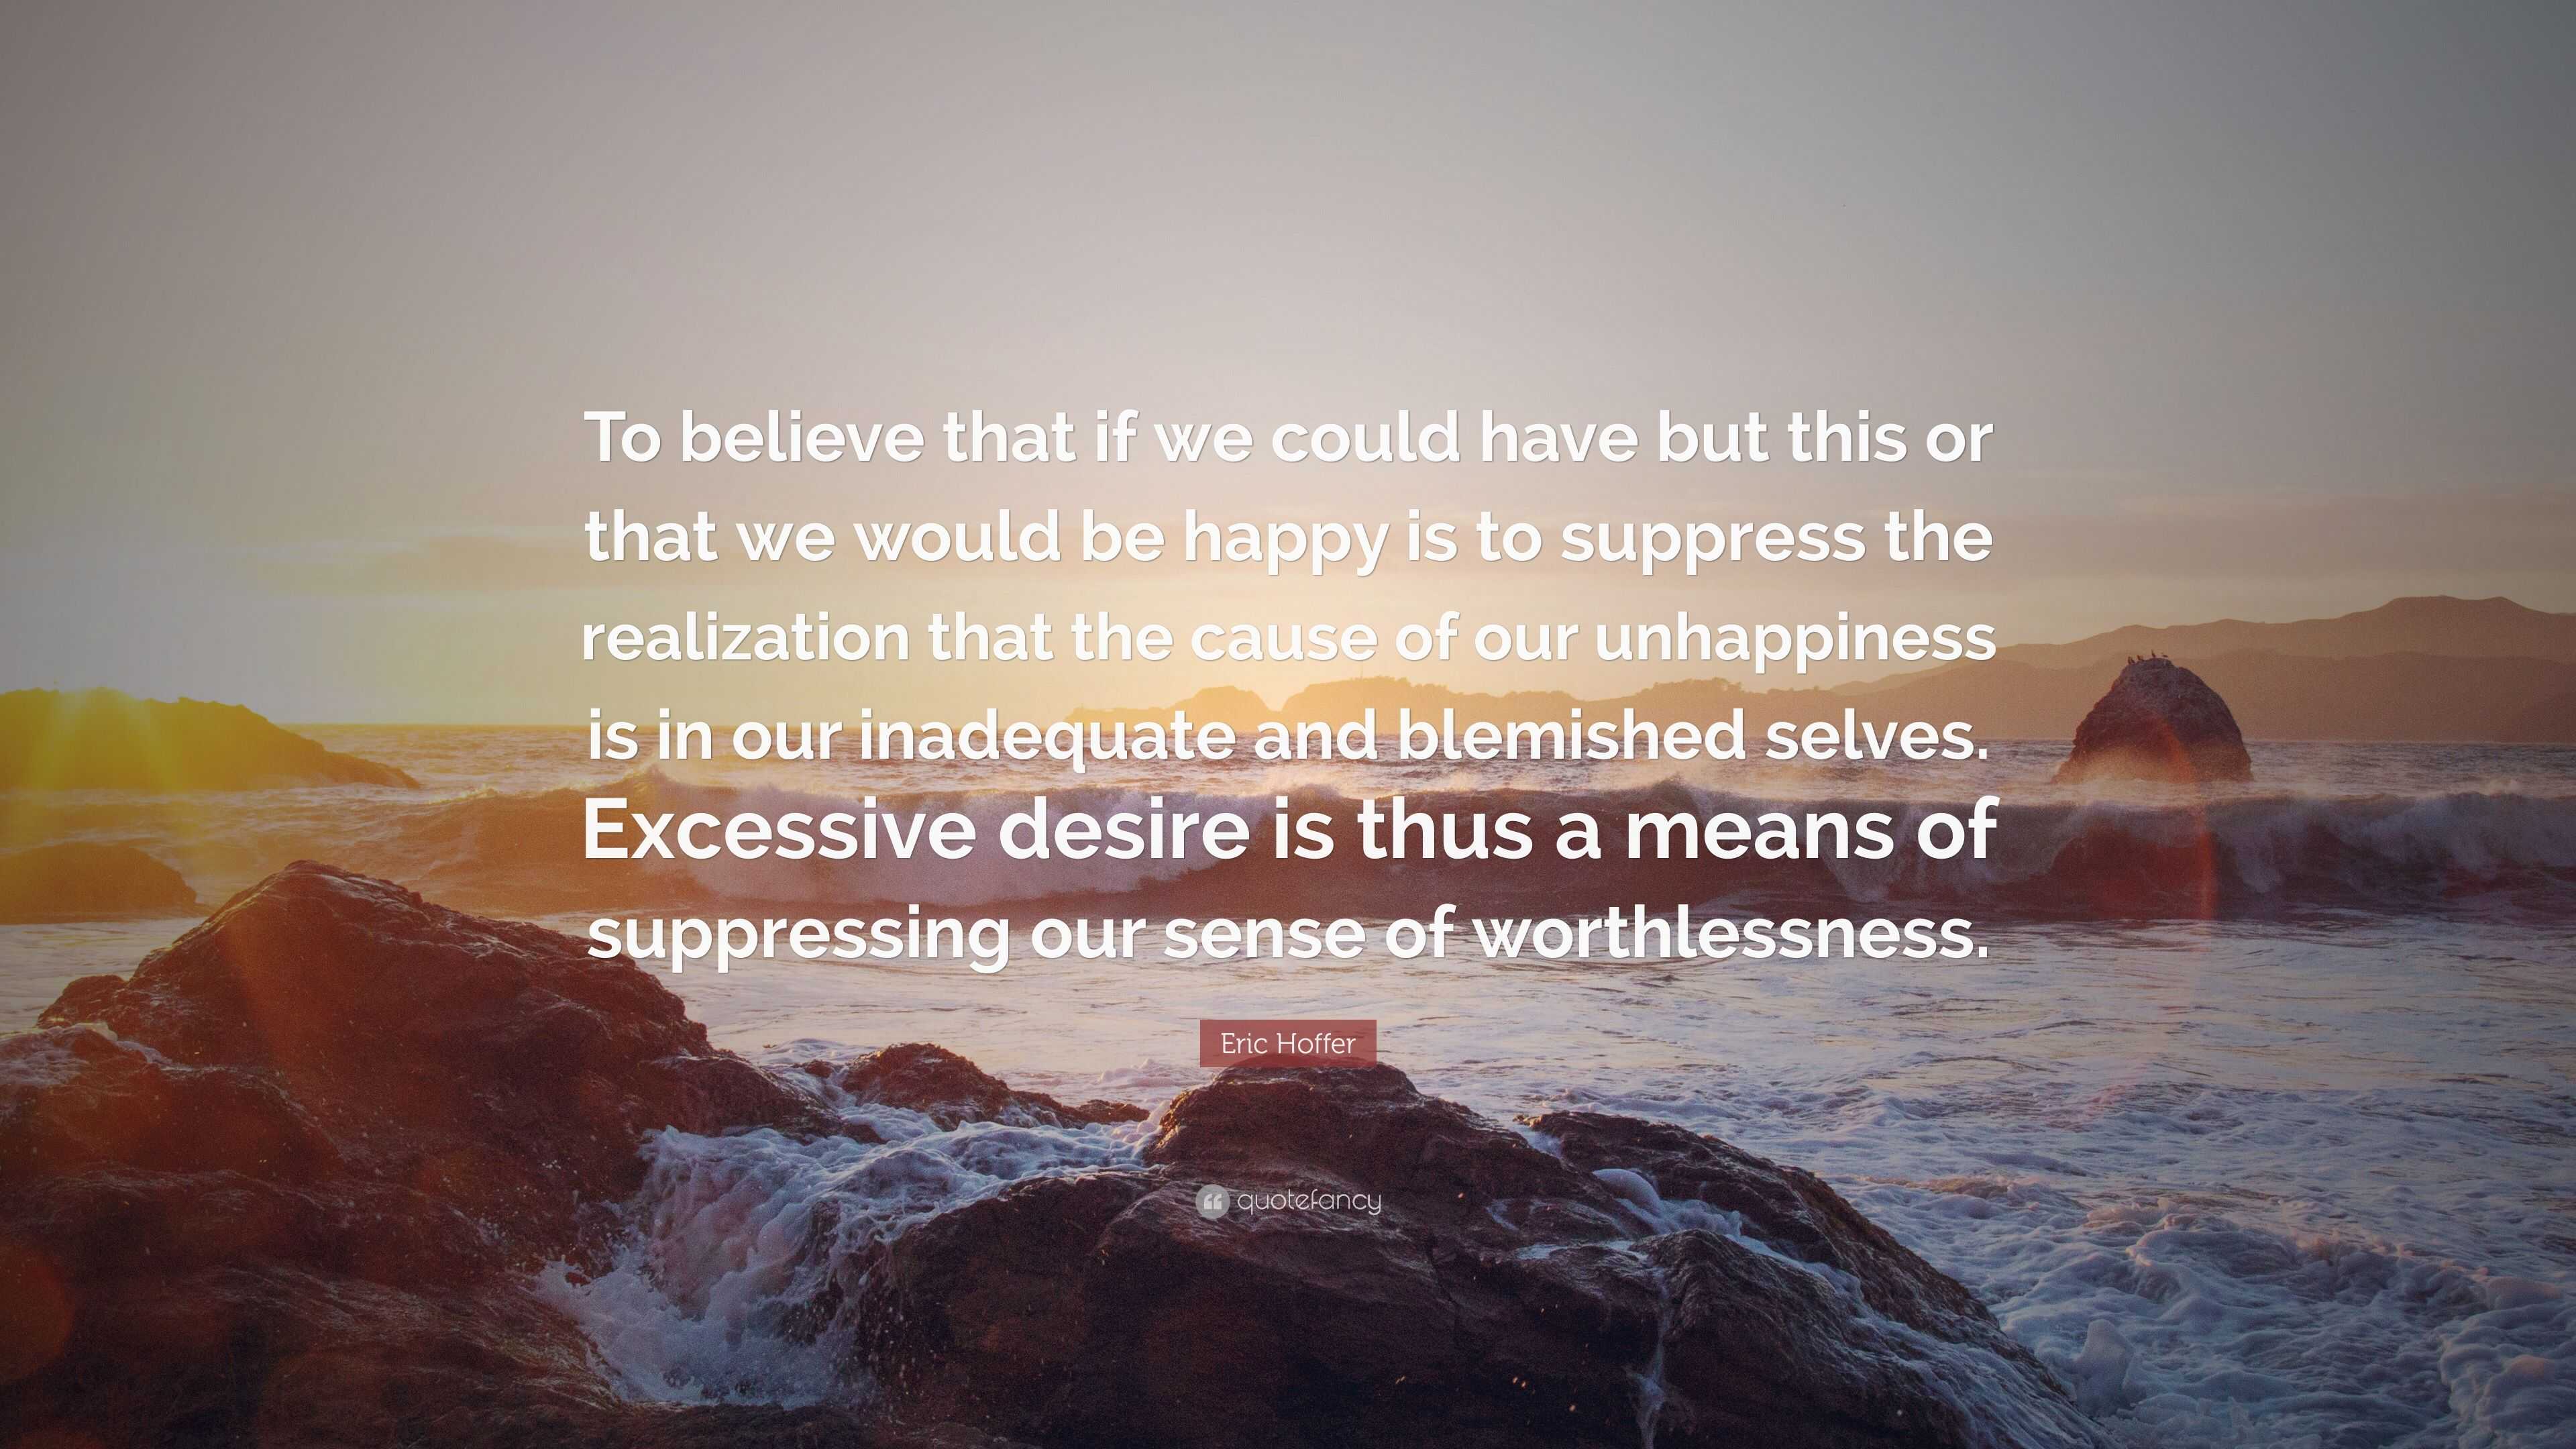 Eric Hoffer Quote: “To believe that if we could have but this or that ...